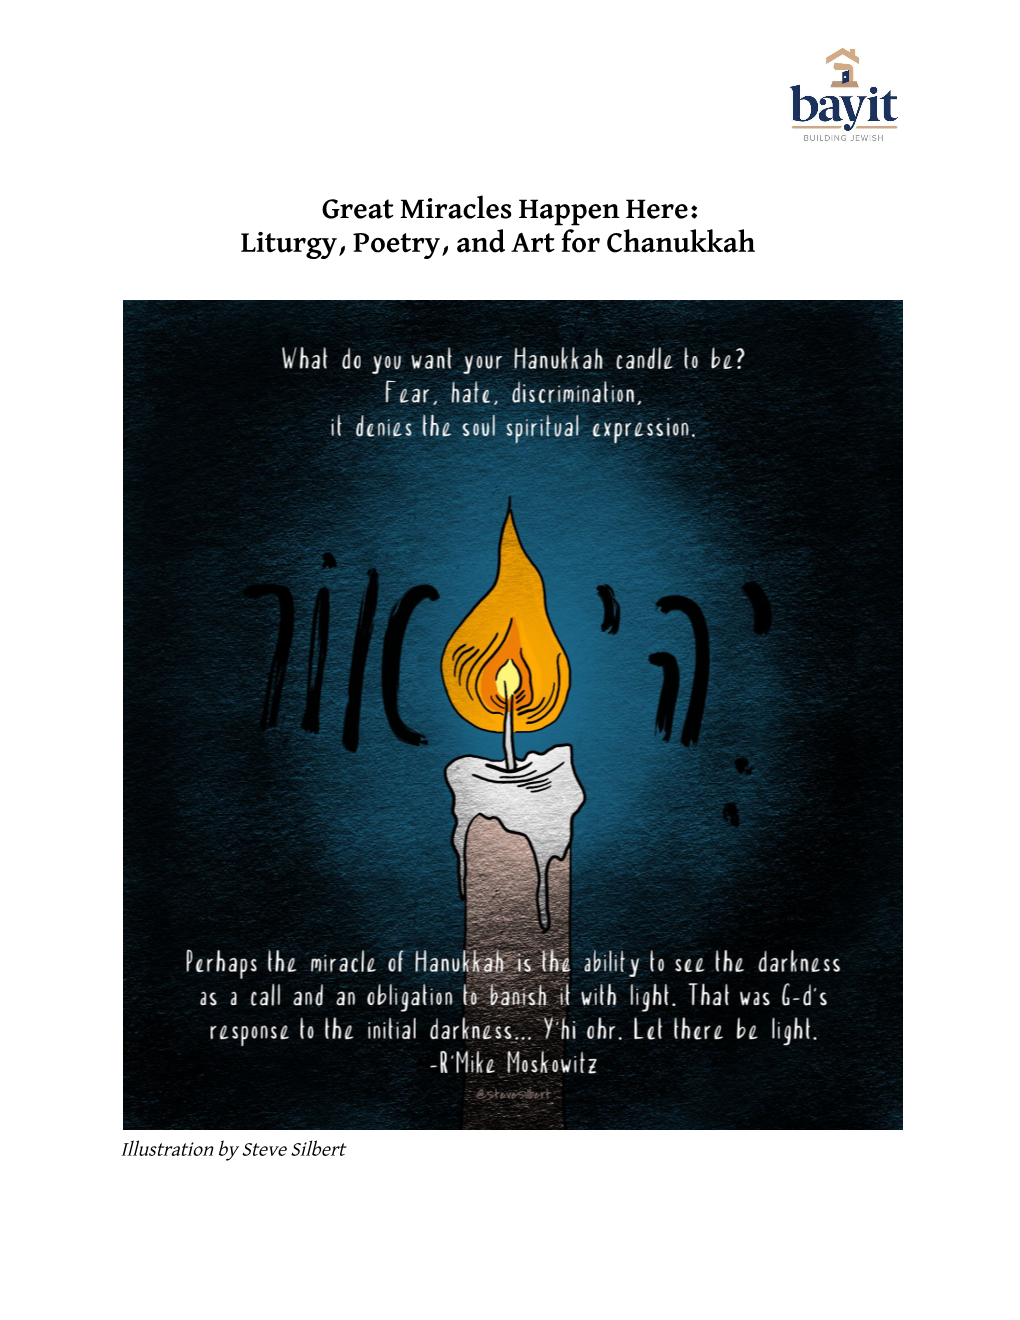 Great Miracles Happen Here: Liturgy, Poetry, and Art for Chanukkah